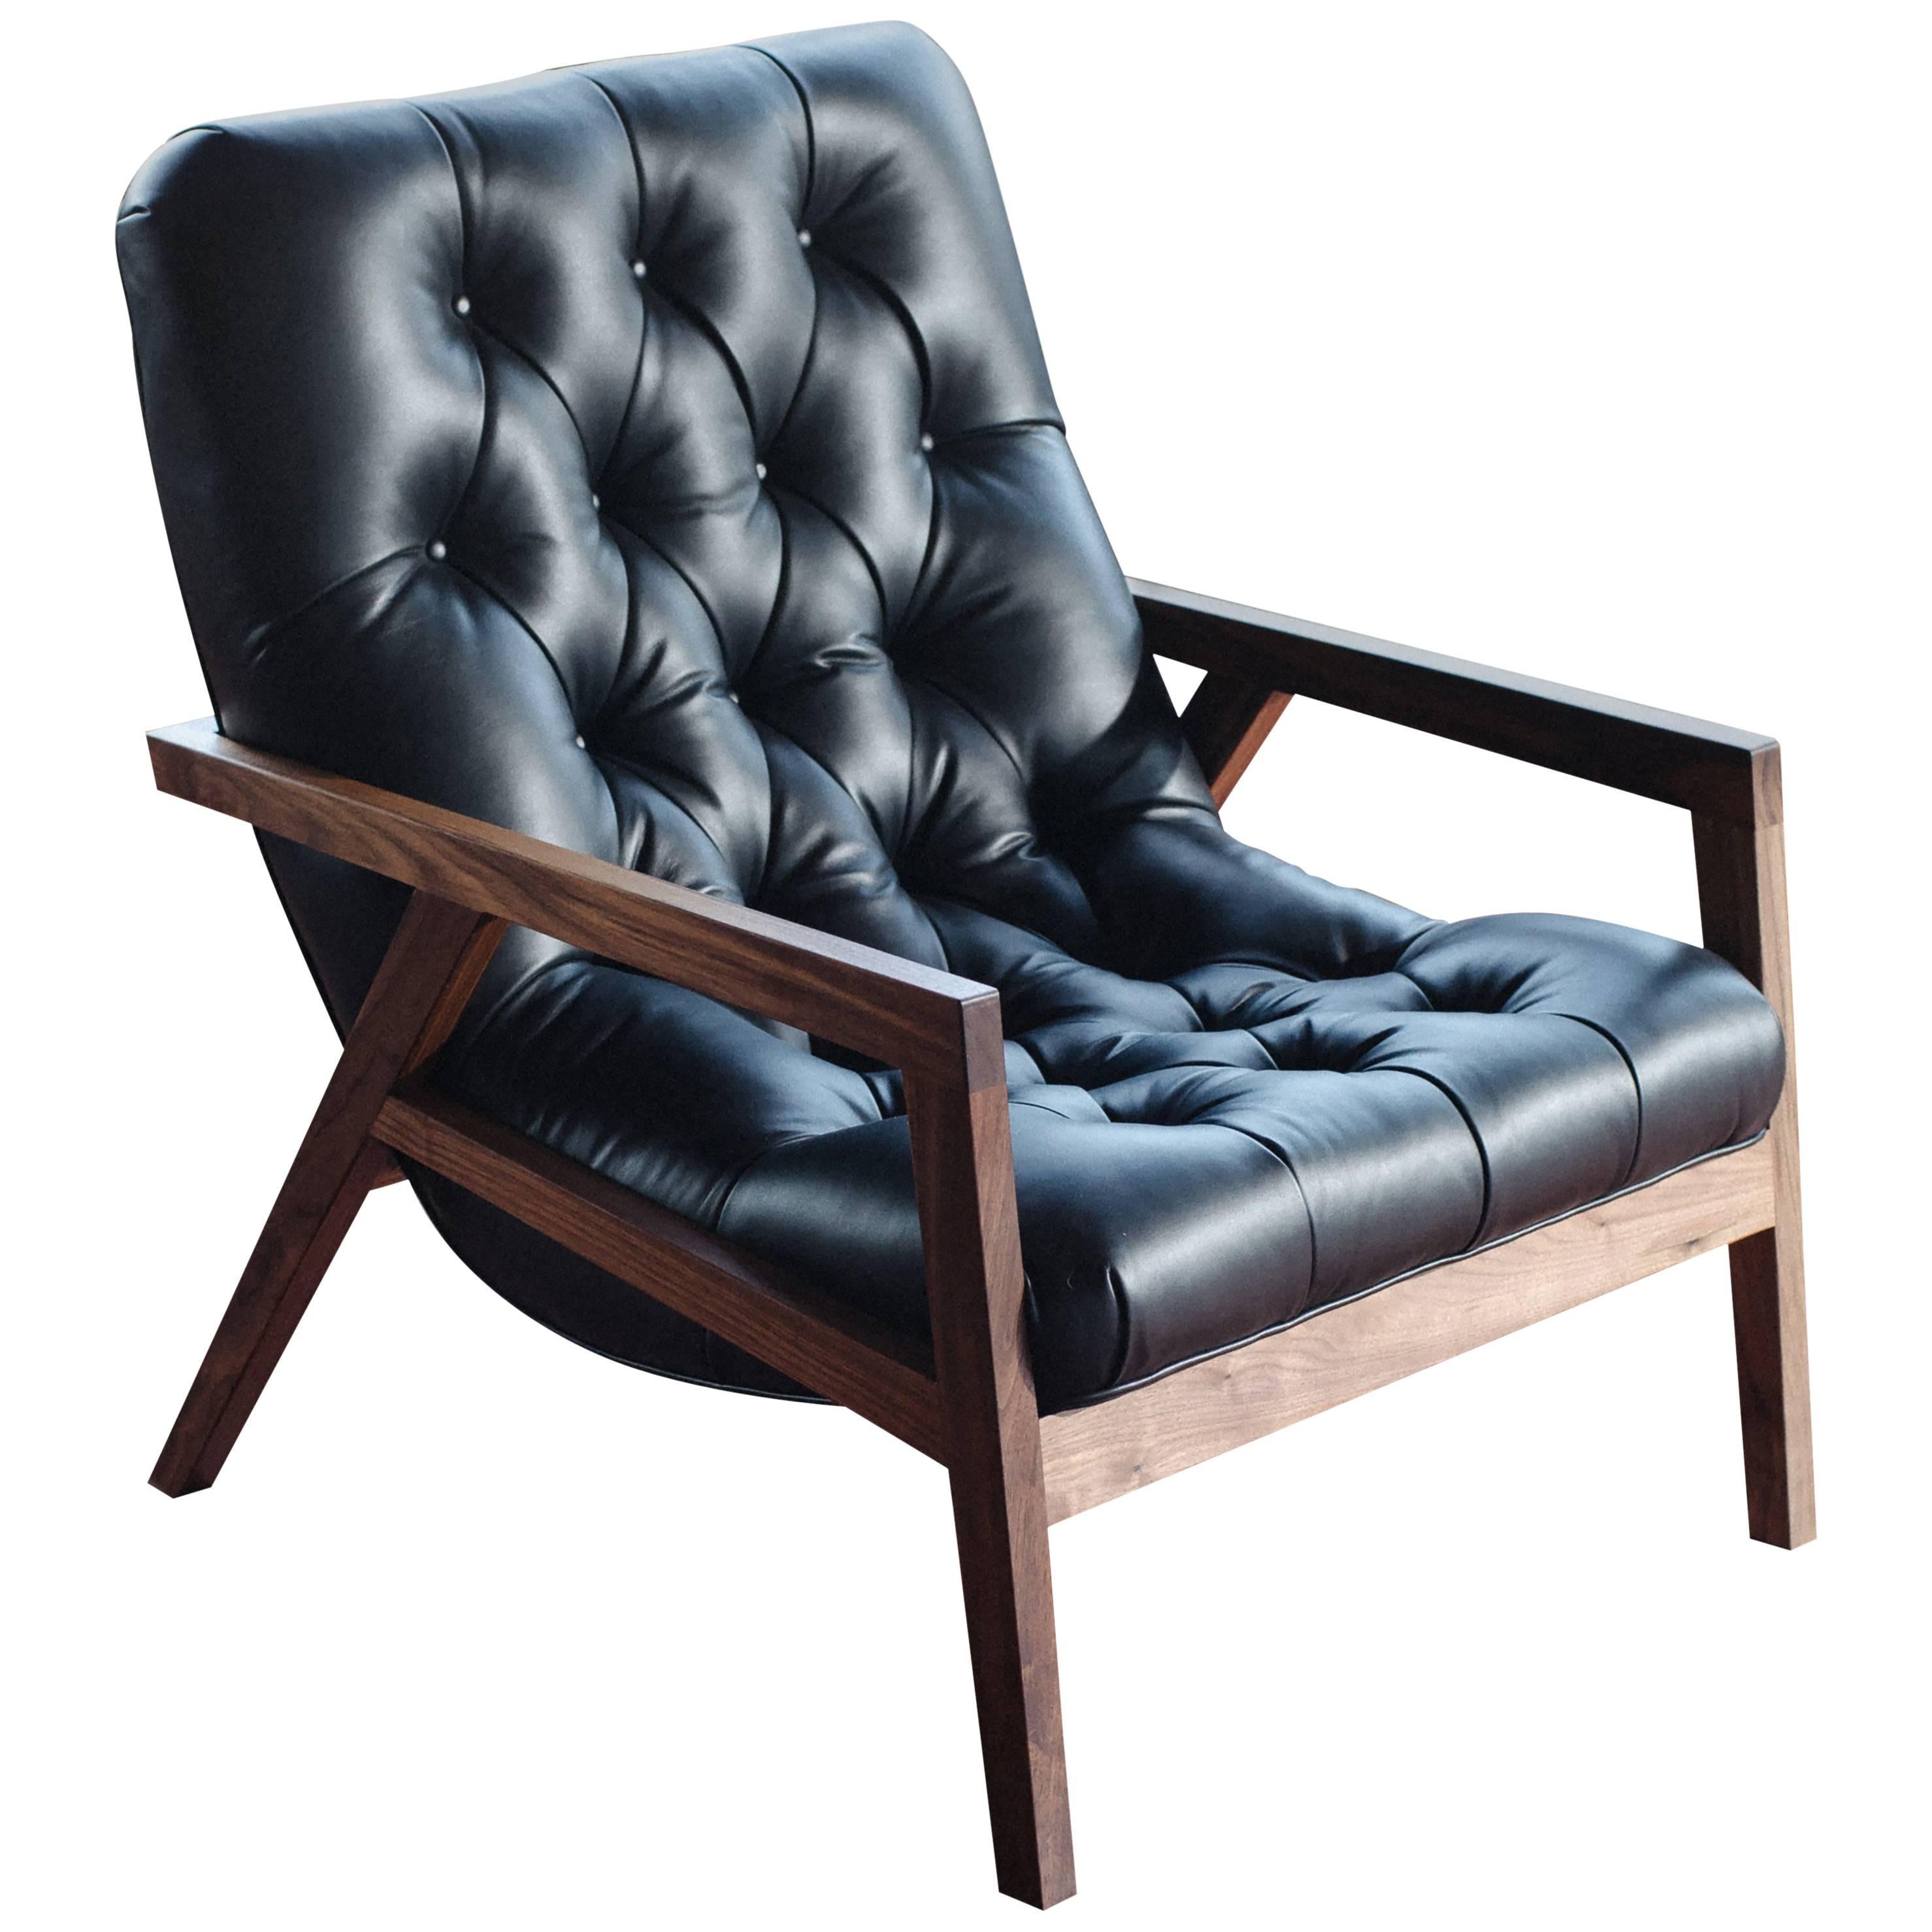 Regina Lounge Chair with Walnut Frame and Leather Diamond Tufted Upholstery